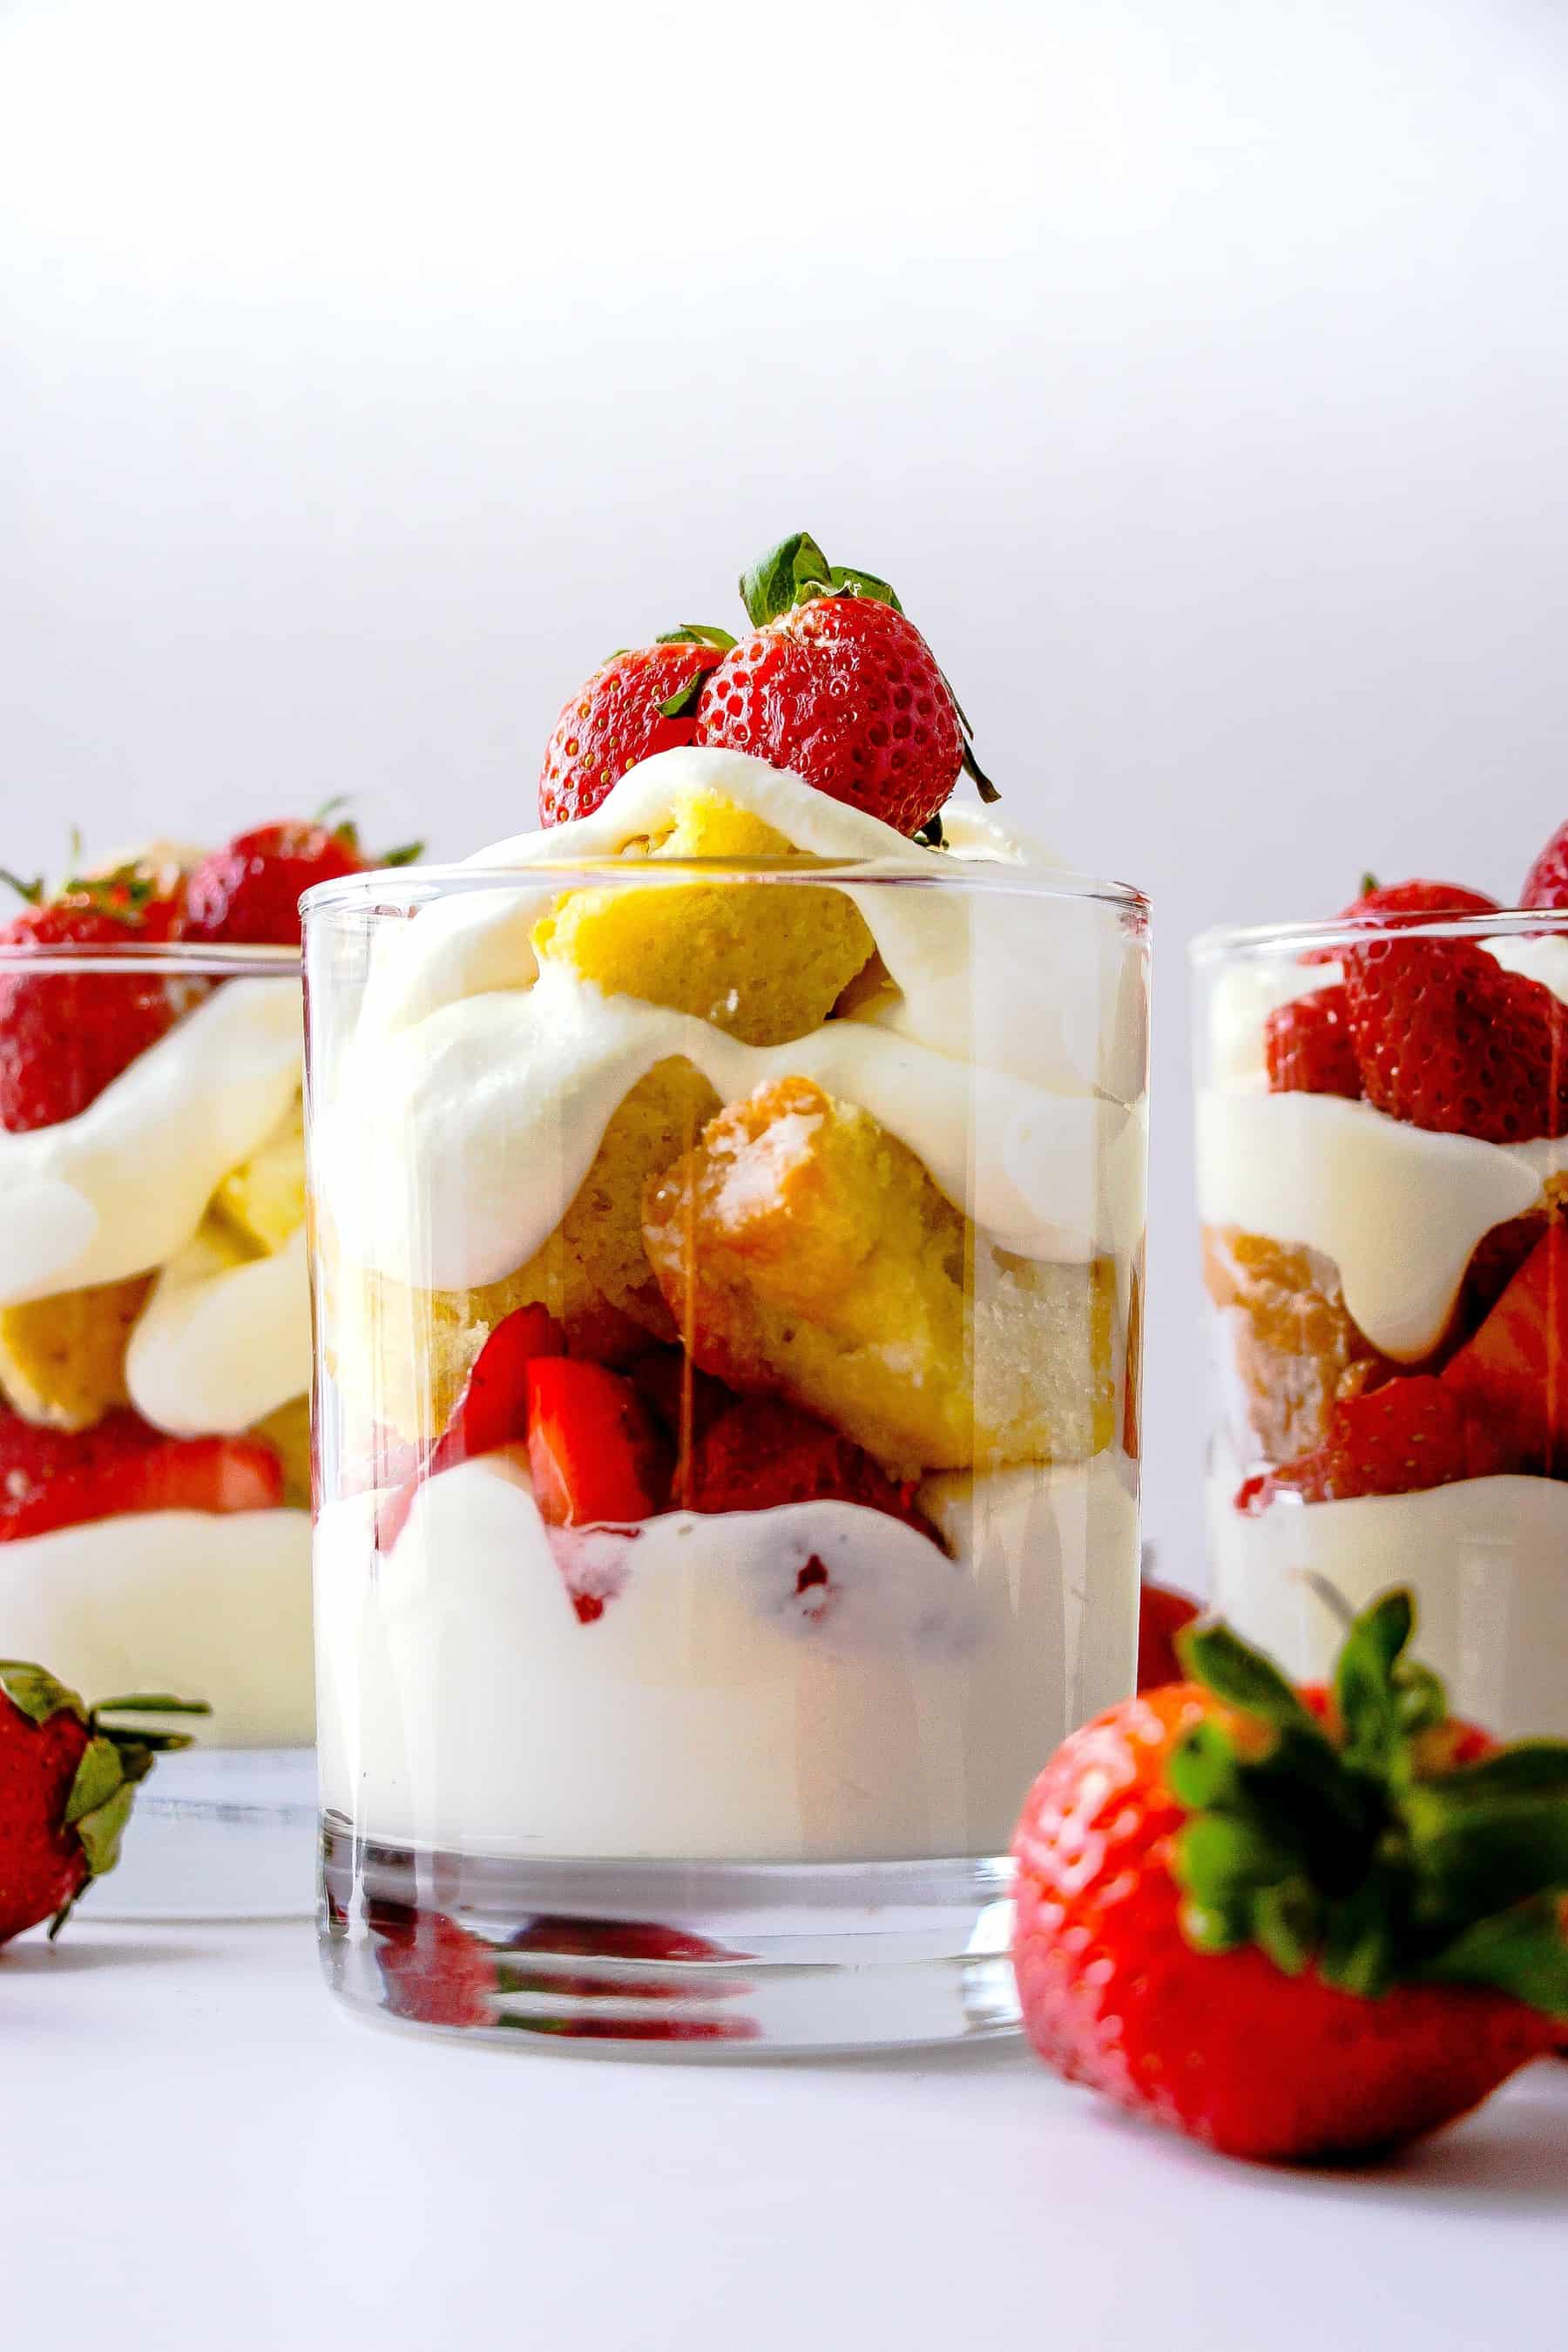 Strawberry Shortcake served in handheld cups